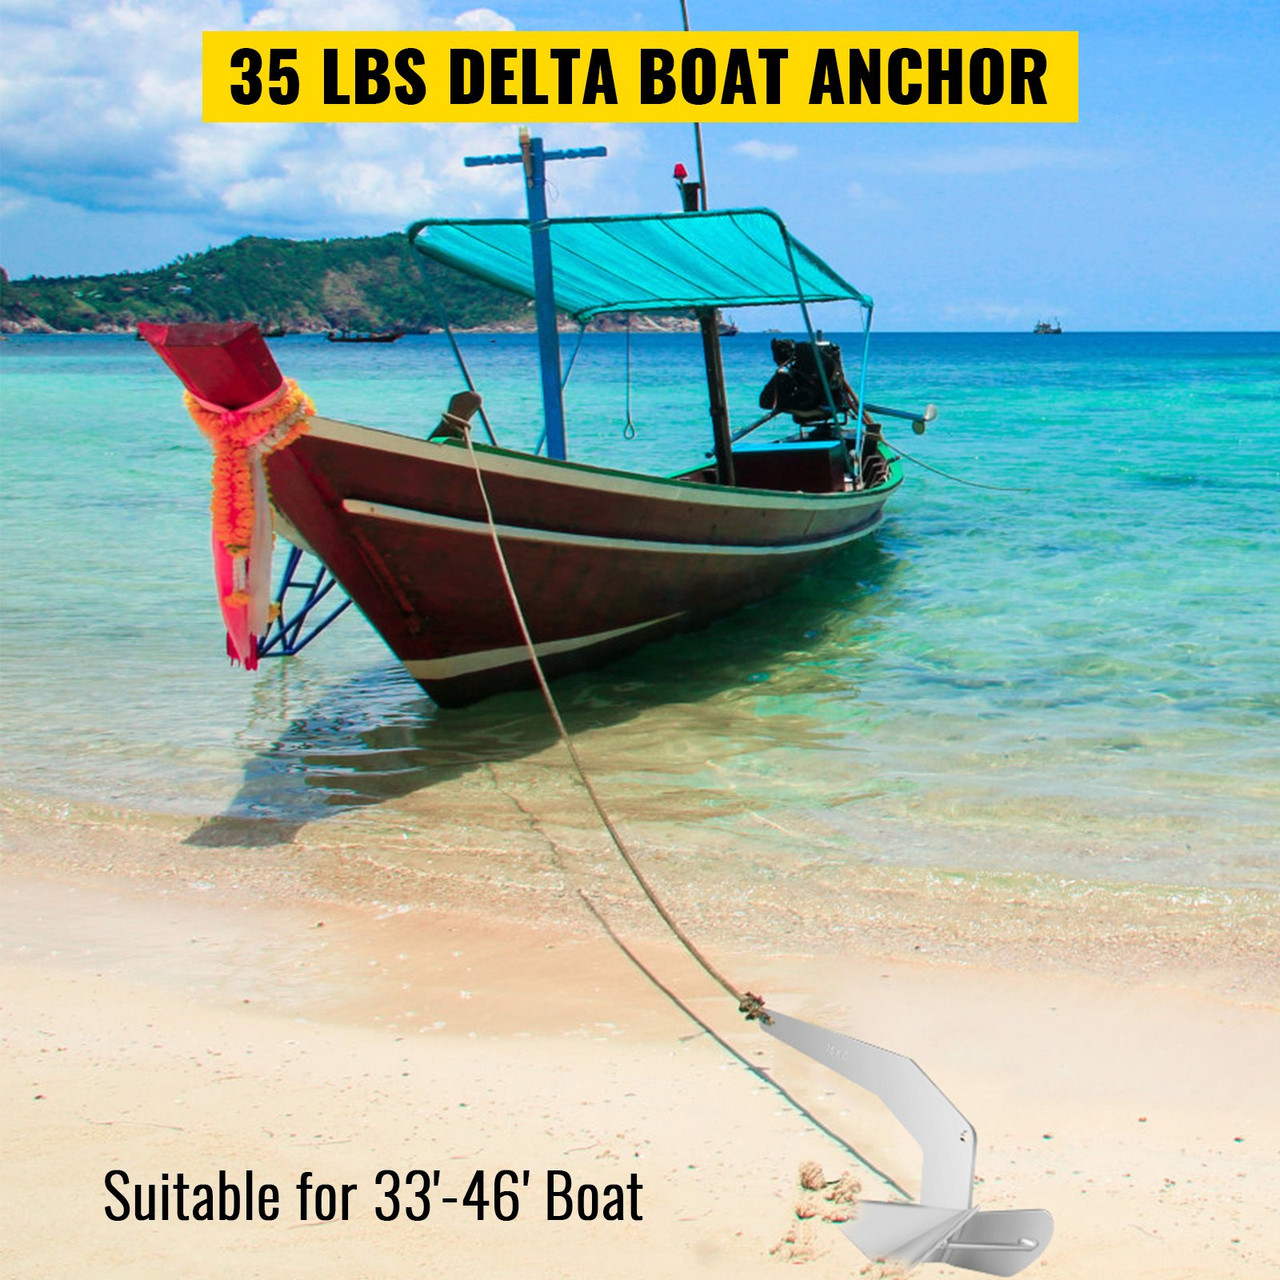 Delta Type Boat Anchor 35 lb 16 kg Delta Anchor, Galvanized Steel Boat Anchor, Triangle Plow Anchor Boat Marine Anchor, Heavy Duty Plow Anchor for Boat Mooring on The Beach, Boats from 33'-46'